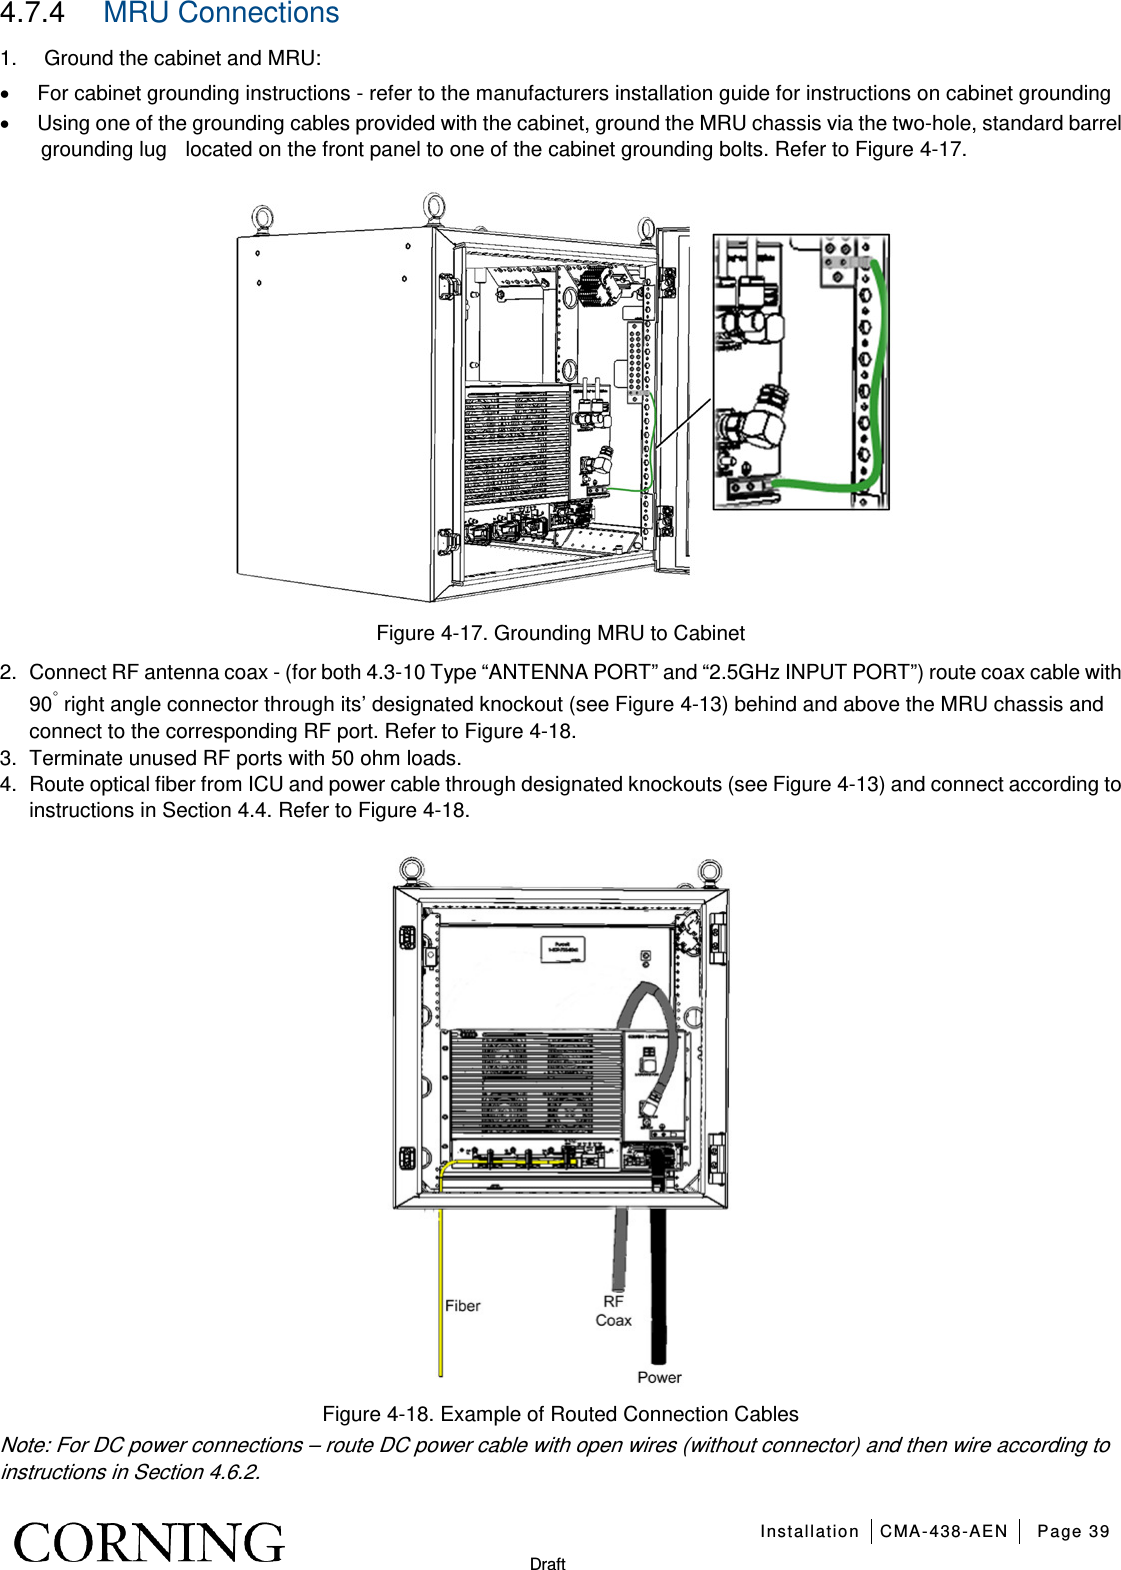   Installation CMA-438-AEN Page 39   Draft 4.7.4  MRU Connections 1.  Ground the cabinet and MRU: • For cabinet grounding instructions - refer to the manufacturers installation guide for instructions on cabinet grounding • Using one of the grounding cables provided with the cabinet, ground the MRU chassis via the two-hole, standard barrel grounding lug  located on the front panel to one of the cabinet grounding bolts. Refer to Figure  4-17.  Figure  4-17. Grounding MRU to Cabinet 2.  Connect RF antenna coax - (for both 4.3-10 Type “ANTENNA PORT” and “2.5GHz INPUT PORT”) route coax cable with 90◦ right angle connector through its’ designated knockout (see Figure  4-13) behind and above the MRU chassis and connect to the corresponding RF port. Refer to Figure  4-18. 3.  Terminate unused RF ports with 50 ohm loads. 4.  Route optical fiber from ICU and power cable through designated knockouts (see Figure  4-13) and connect according to instructions in Section  4.4. Refer to Figure  4-18.  Figure  4-18. Example of Routed Connection Cables   Note: For DC power connections – route DC power cable with open wires (without connector) and then wire according to instructions in Section 4.6.2. 